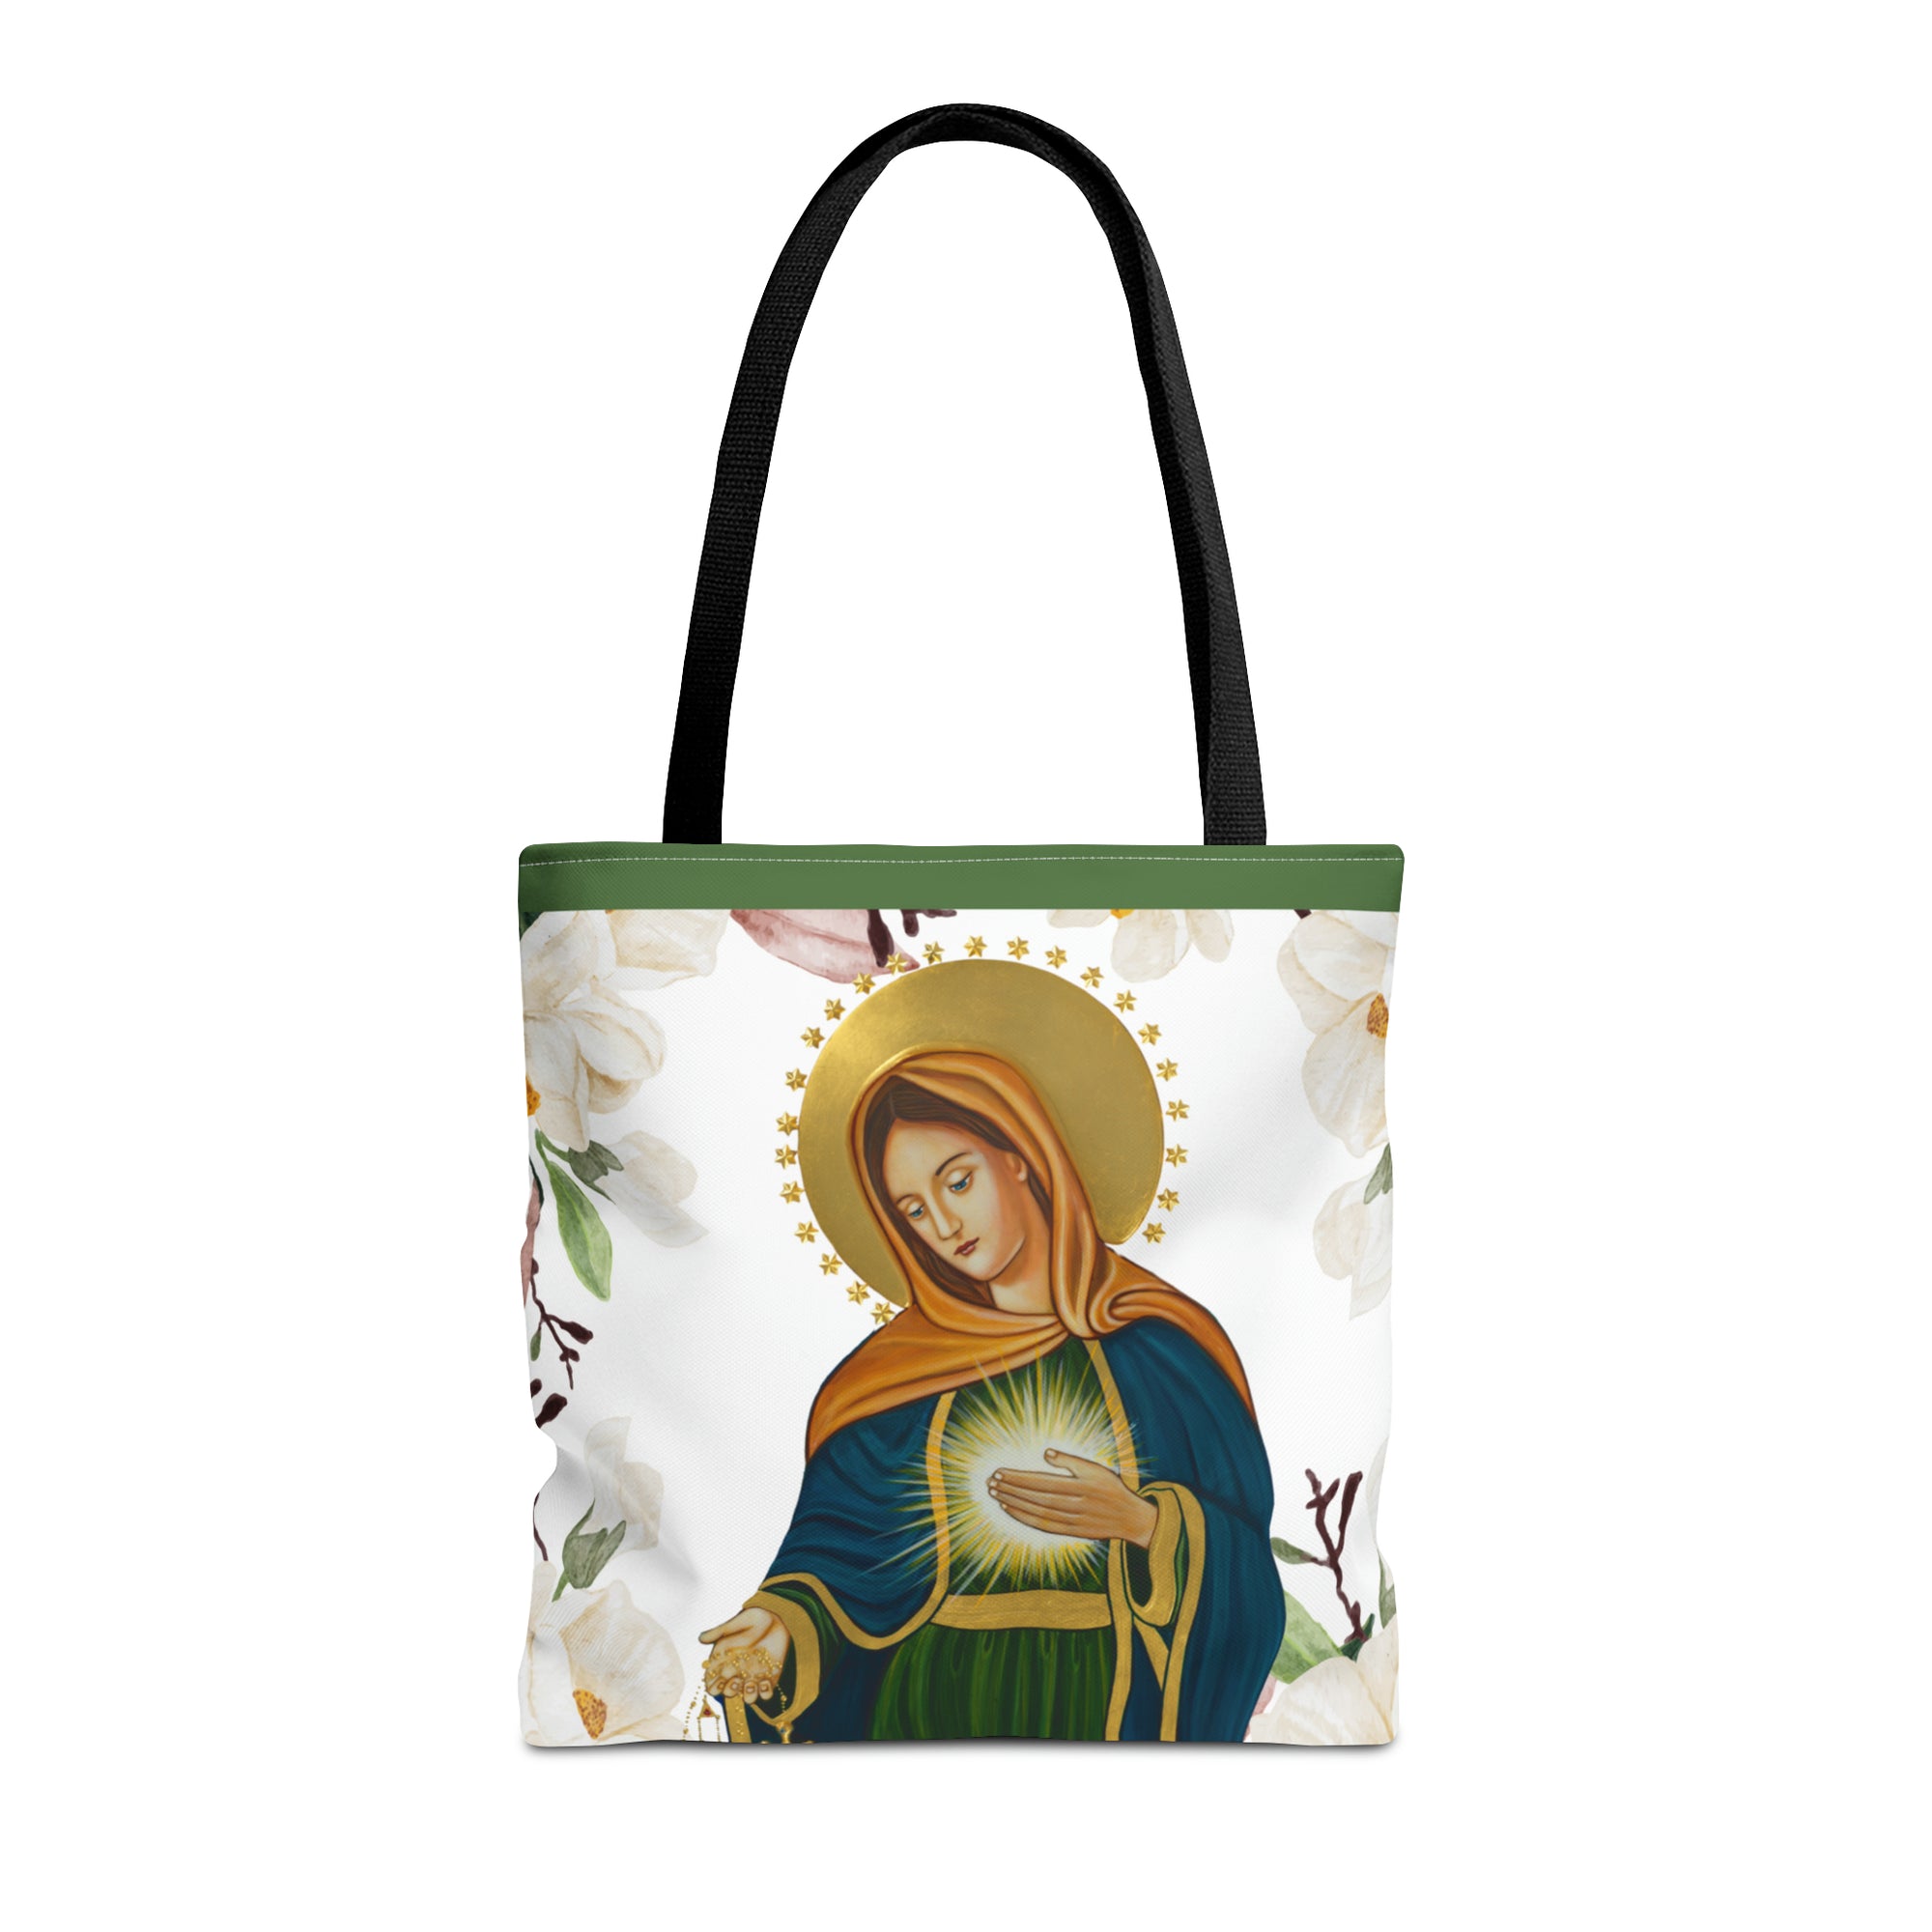 Flame of Love Tote Bag (Green Floral) 16"x16"